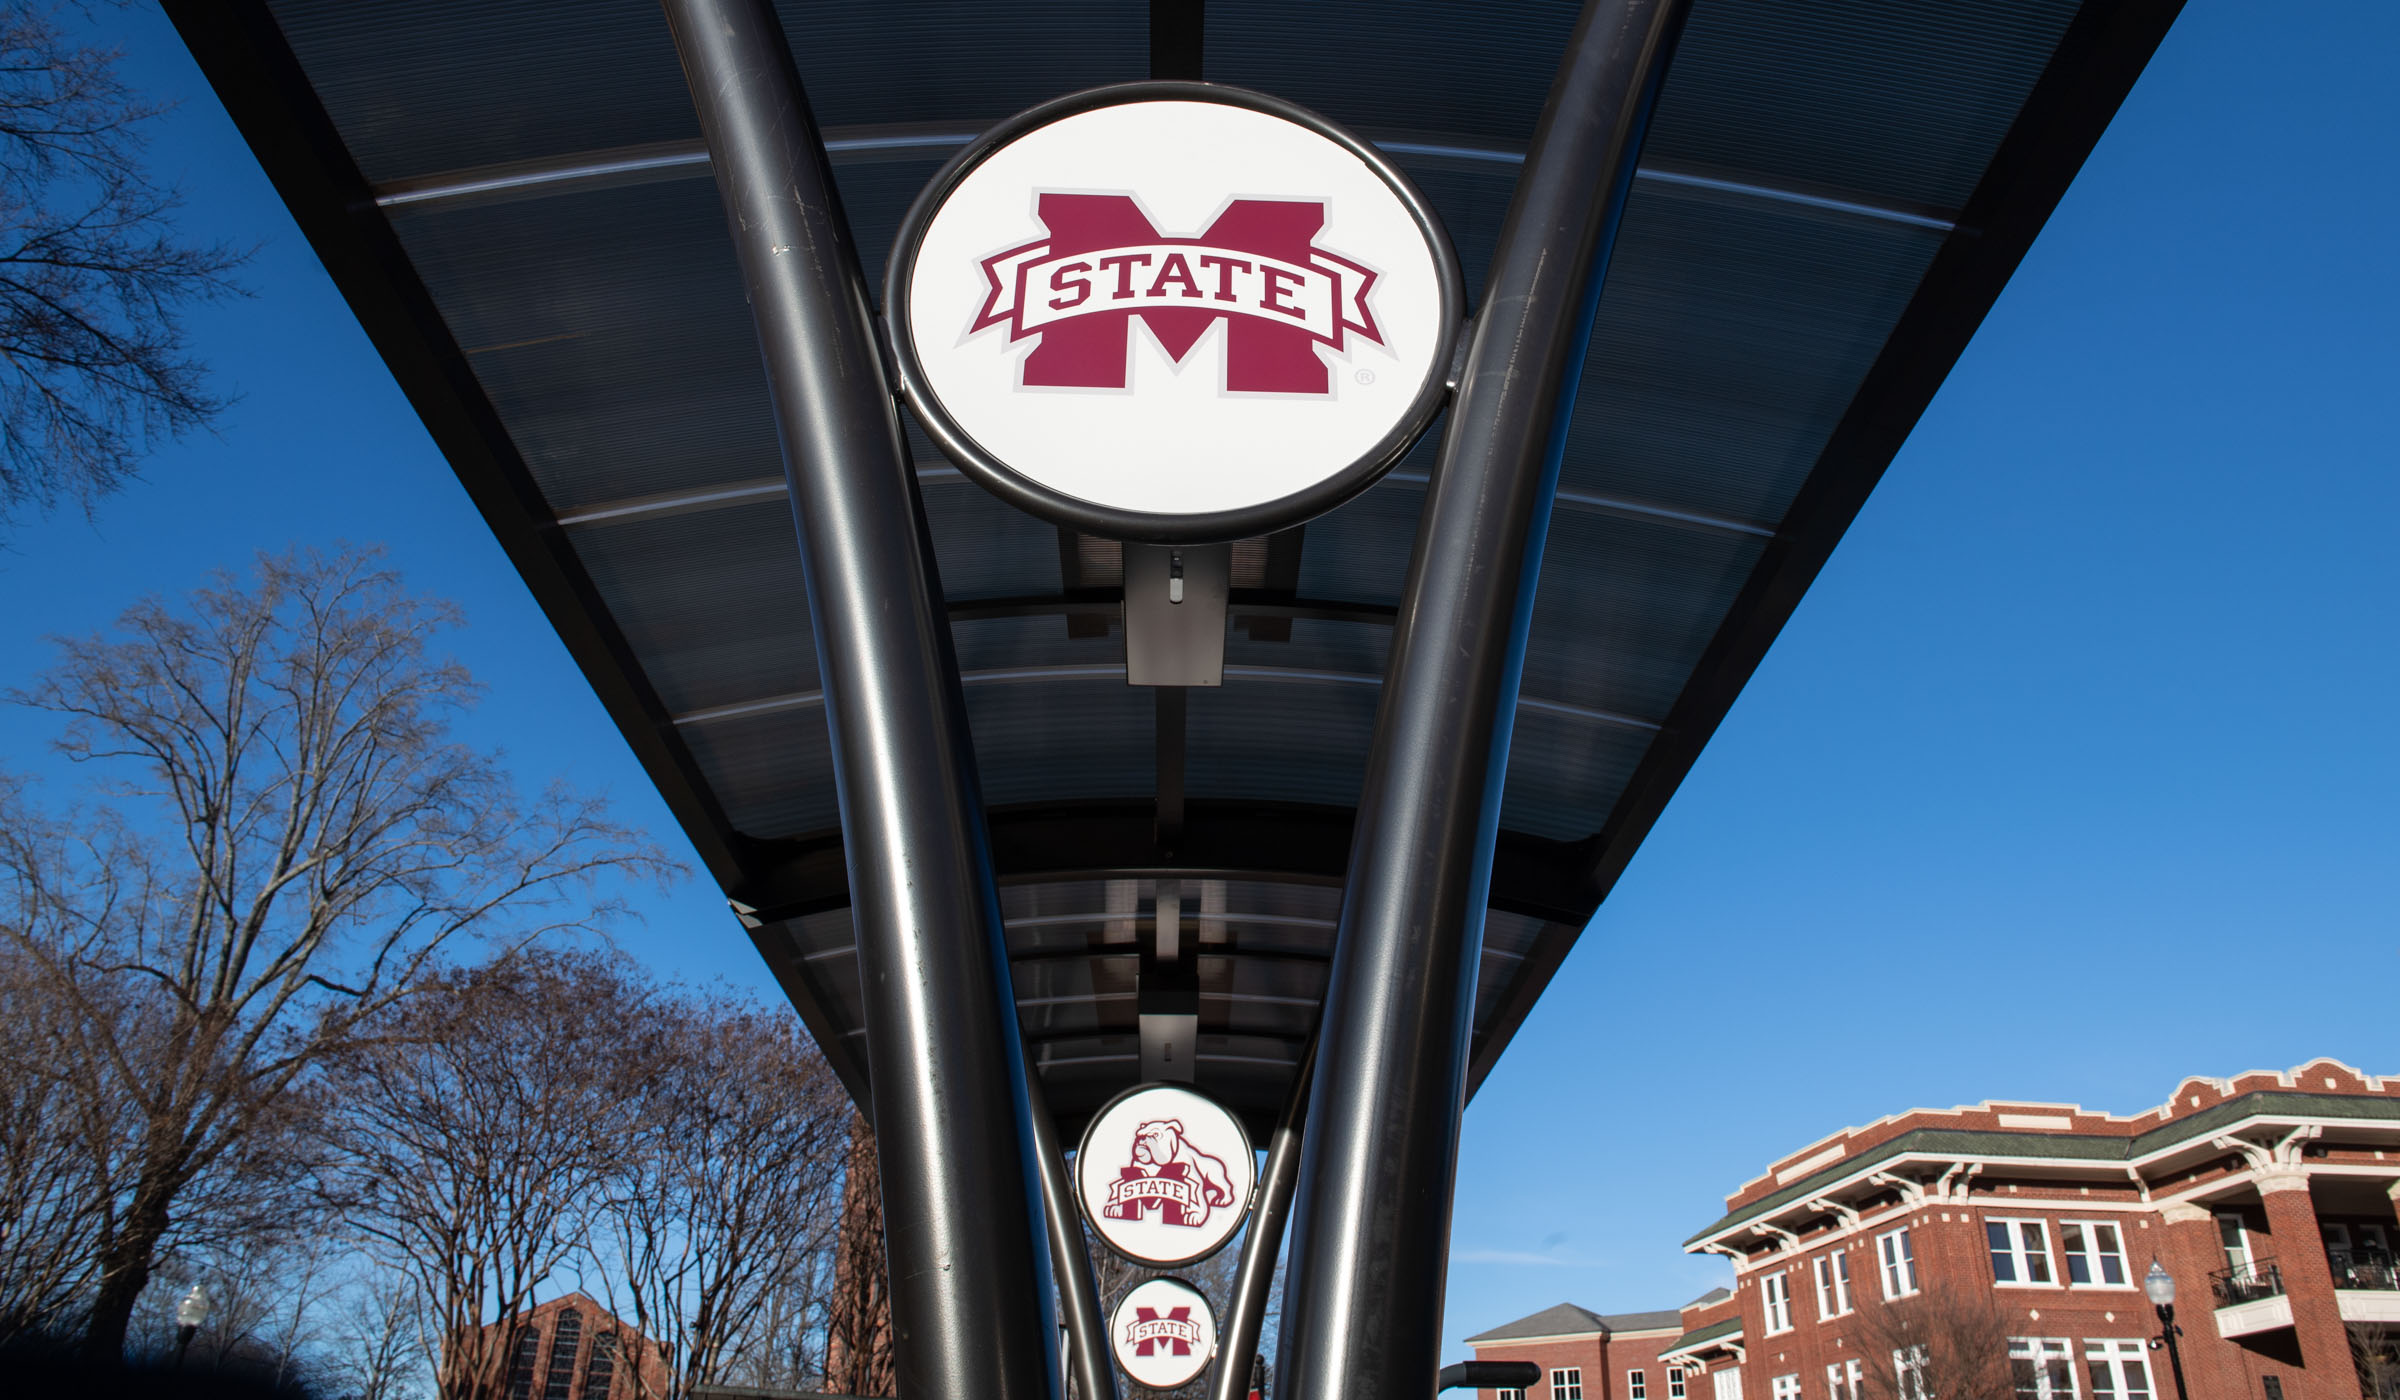 Three M-State logos on white circles decorate the center poles supporting the curved roof of a bike rack shelter, with blue sky, the Chapel, and the YMCA Building beyond.